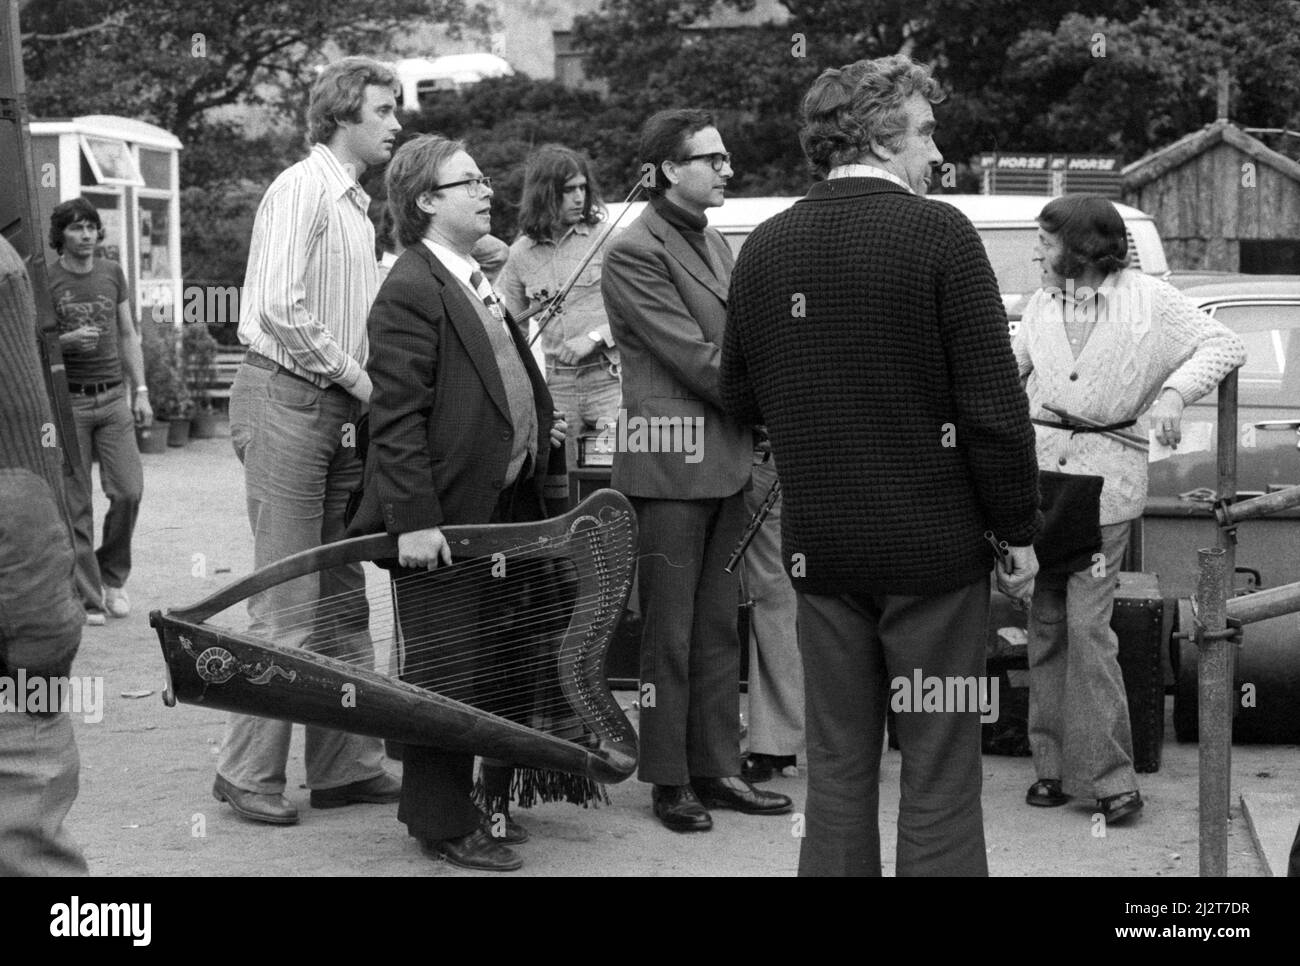 Irish folk band The Chieftains waiting to go on stage at the July Wakes folk festival in Chorley, Lancashire, England on 25 July 1976. Stock Photo